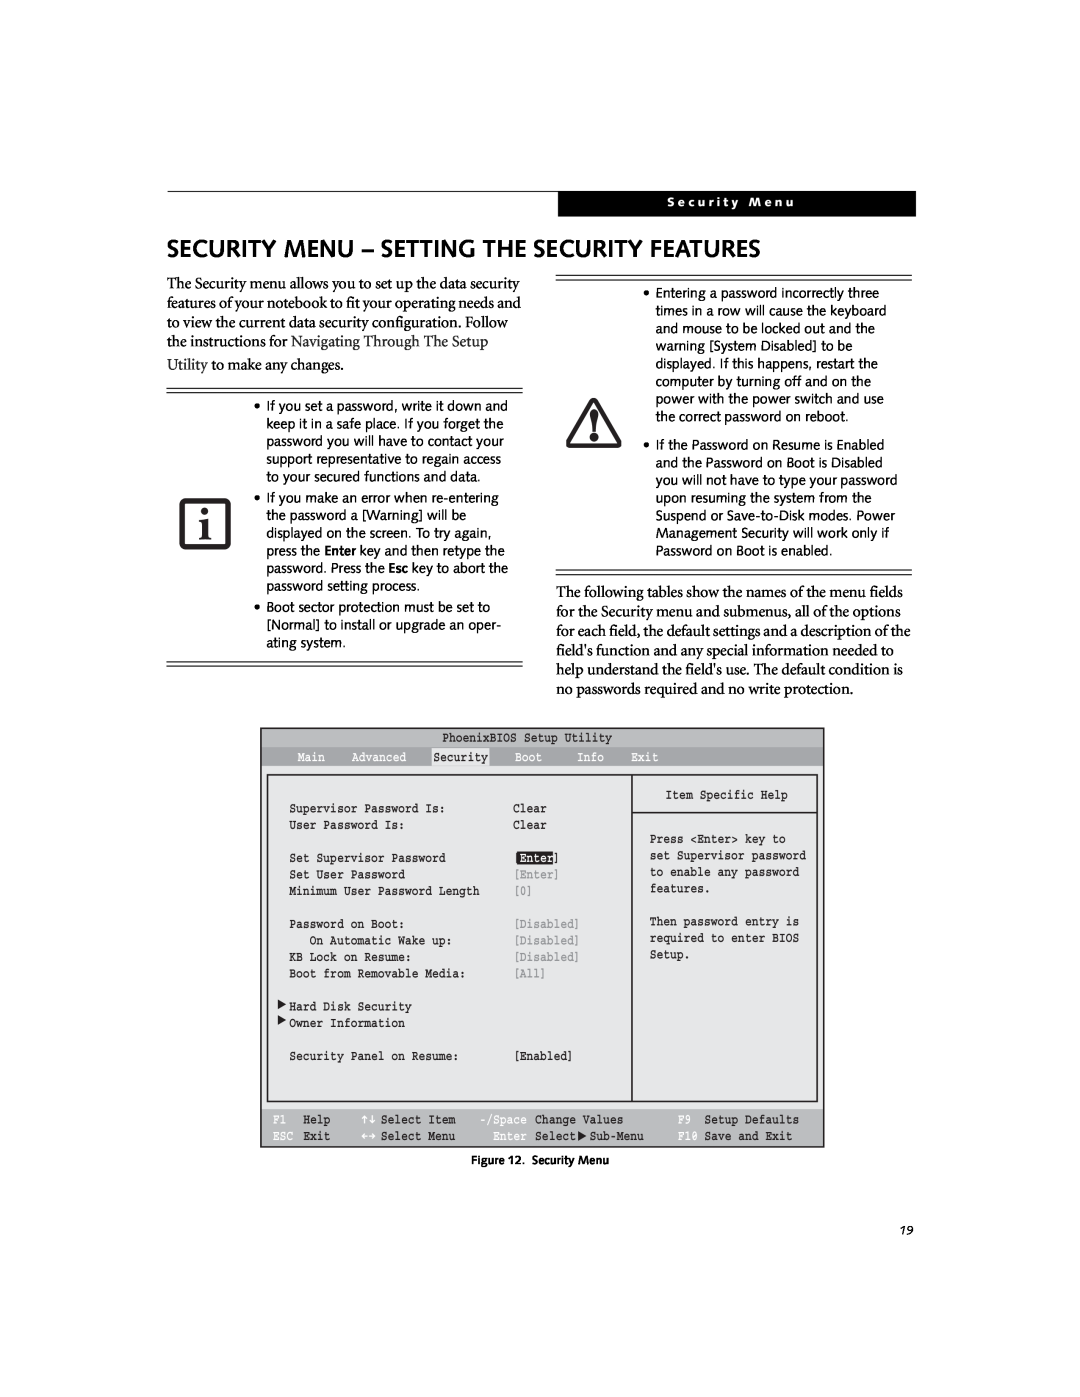 Fujitsu Siemens Computers B3000 Security Menu - Setting The Security Features, Main, Advanced, Boot, Info, Exit, Clear 